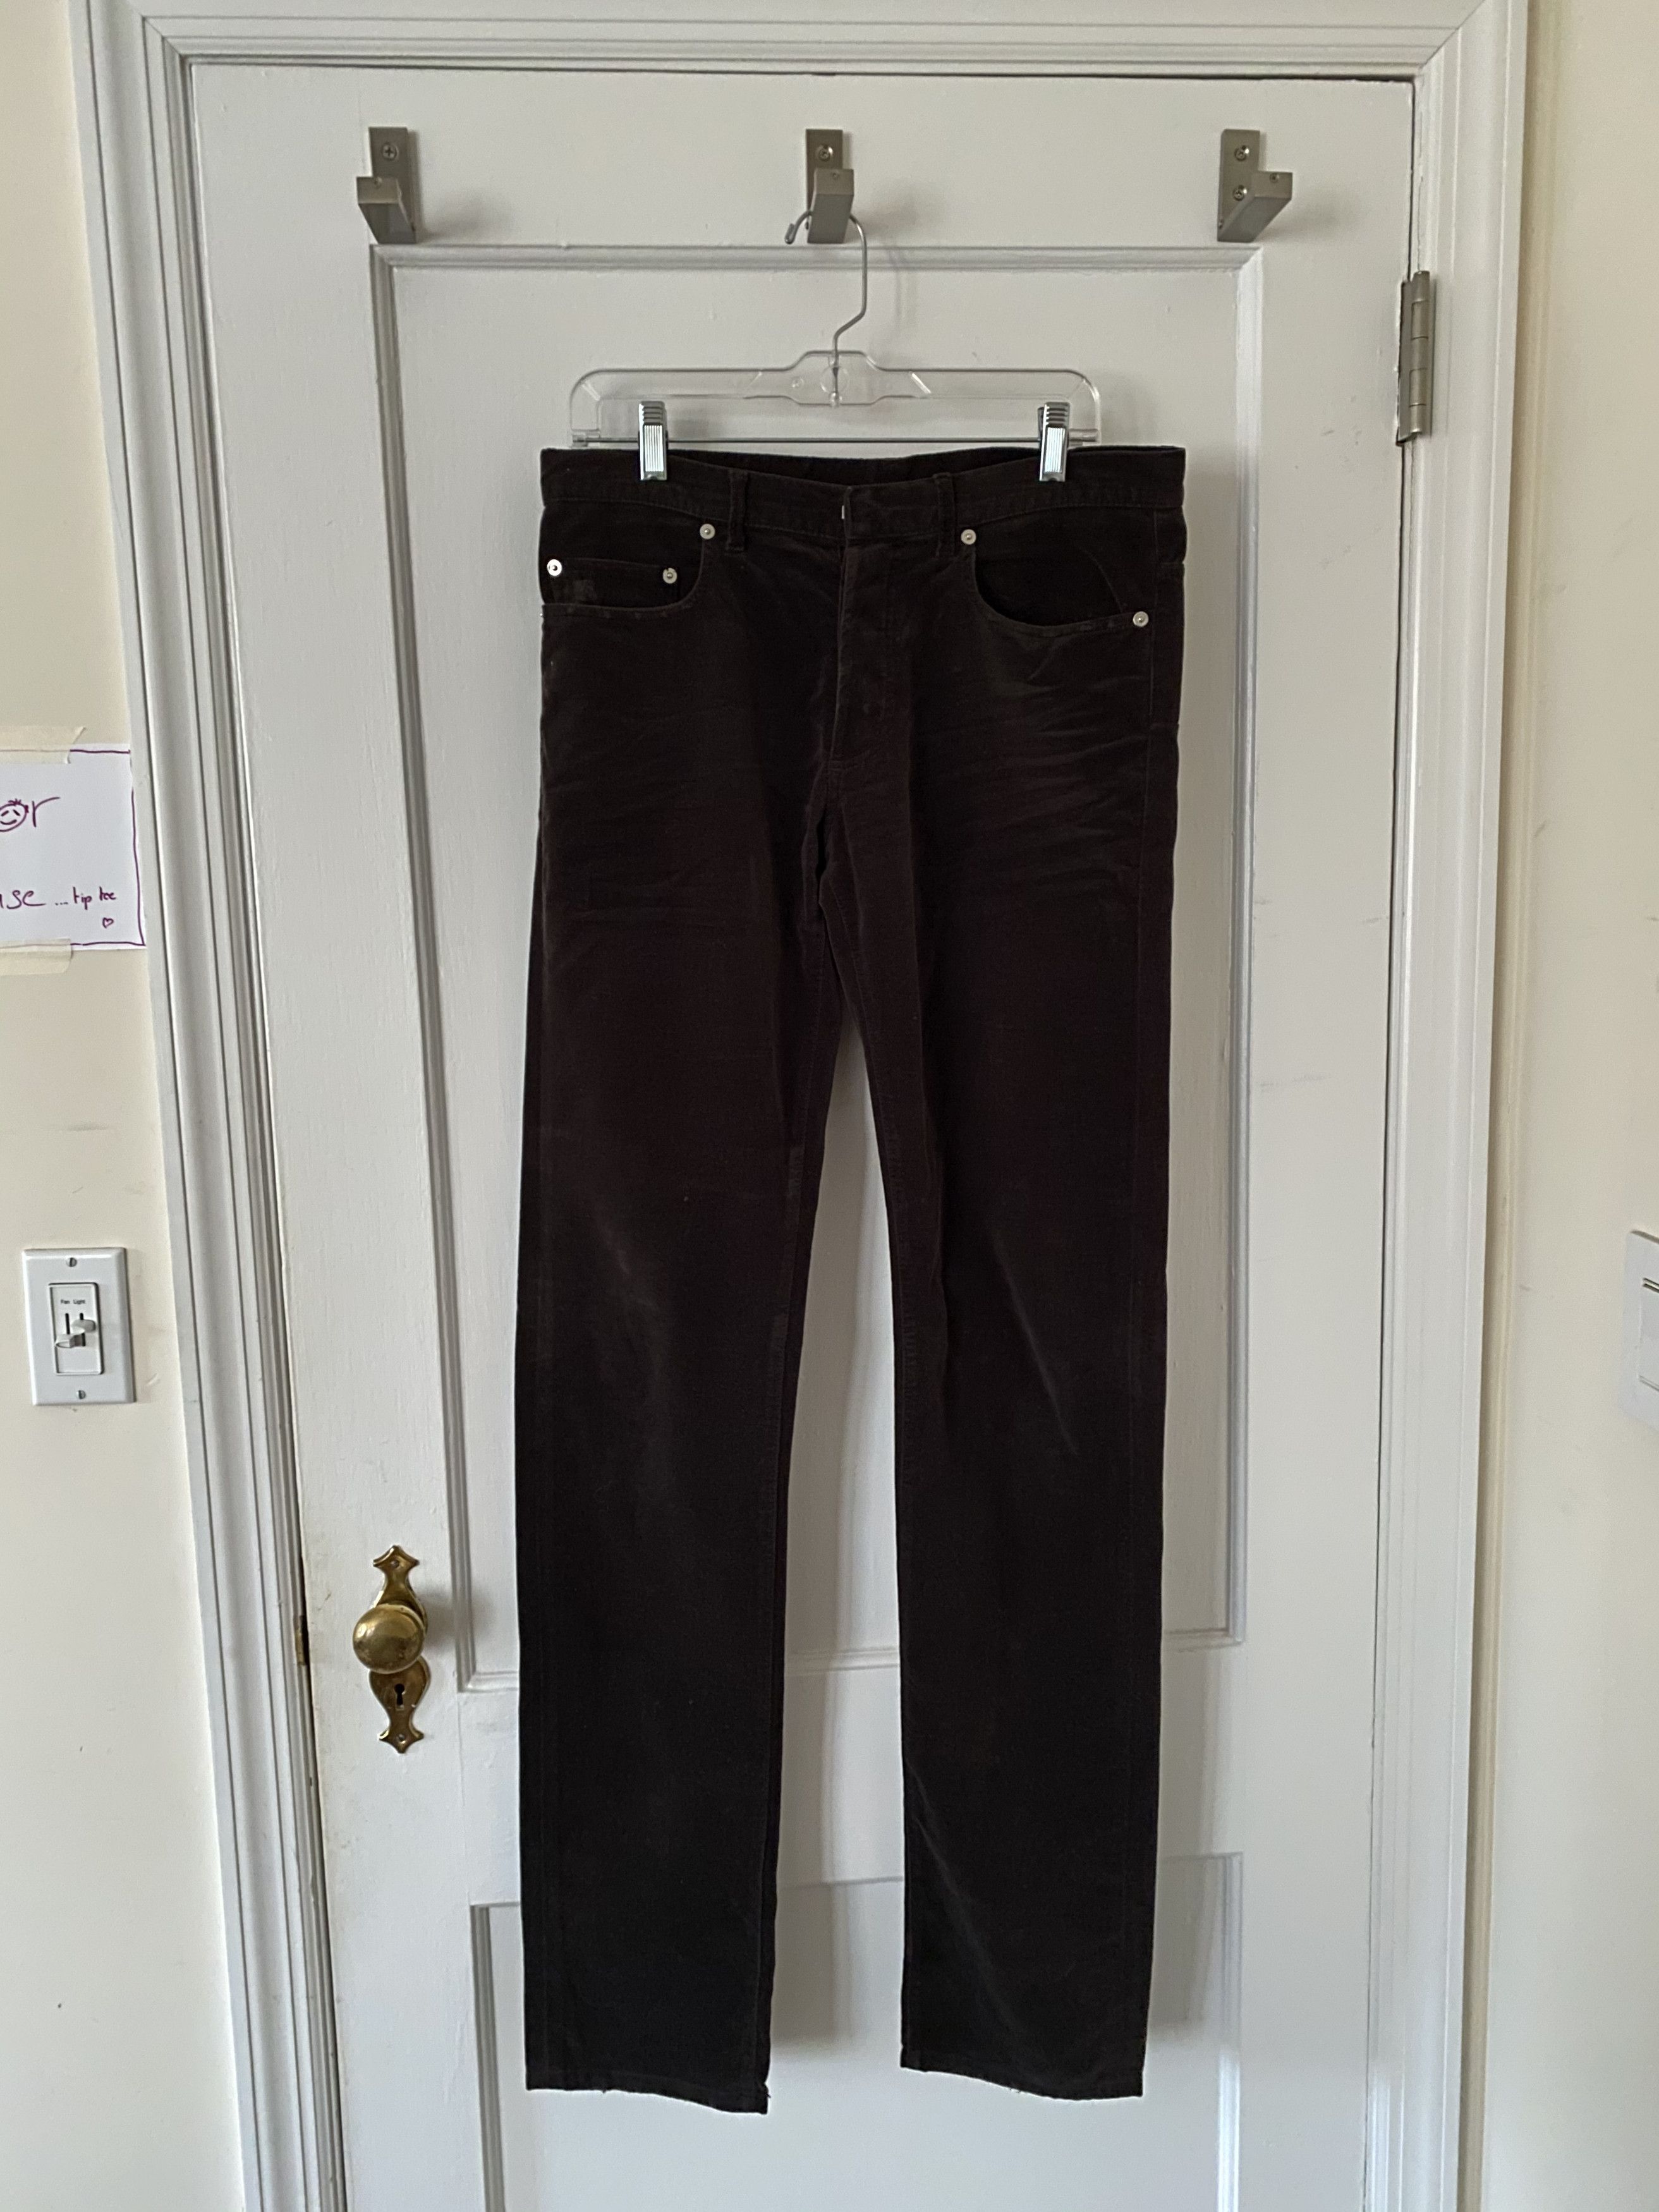 Dior Dior Homme AW05 Brown Velvet Pants / Jeans | Grailed